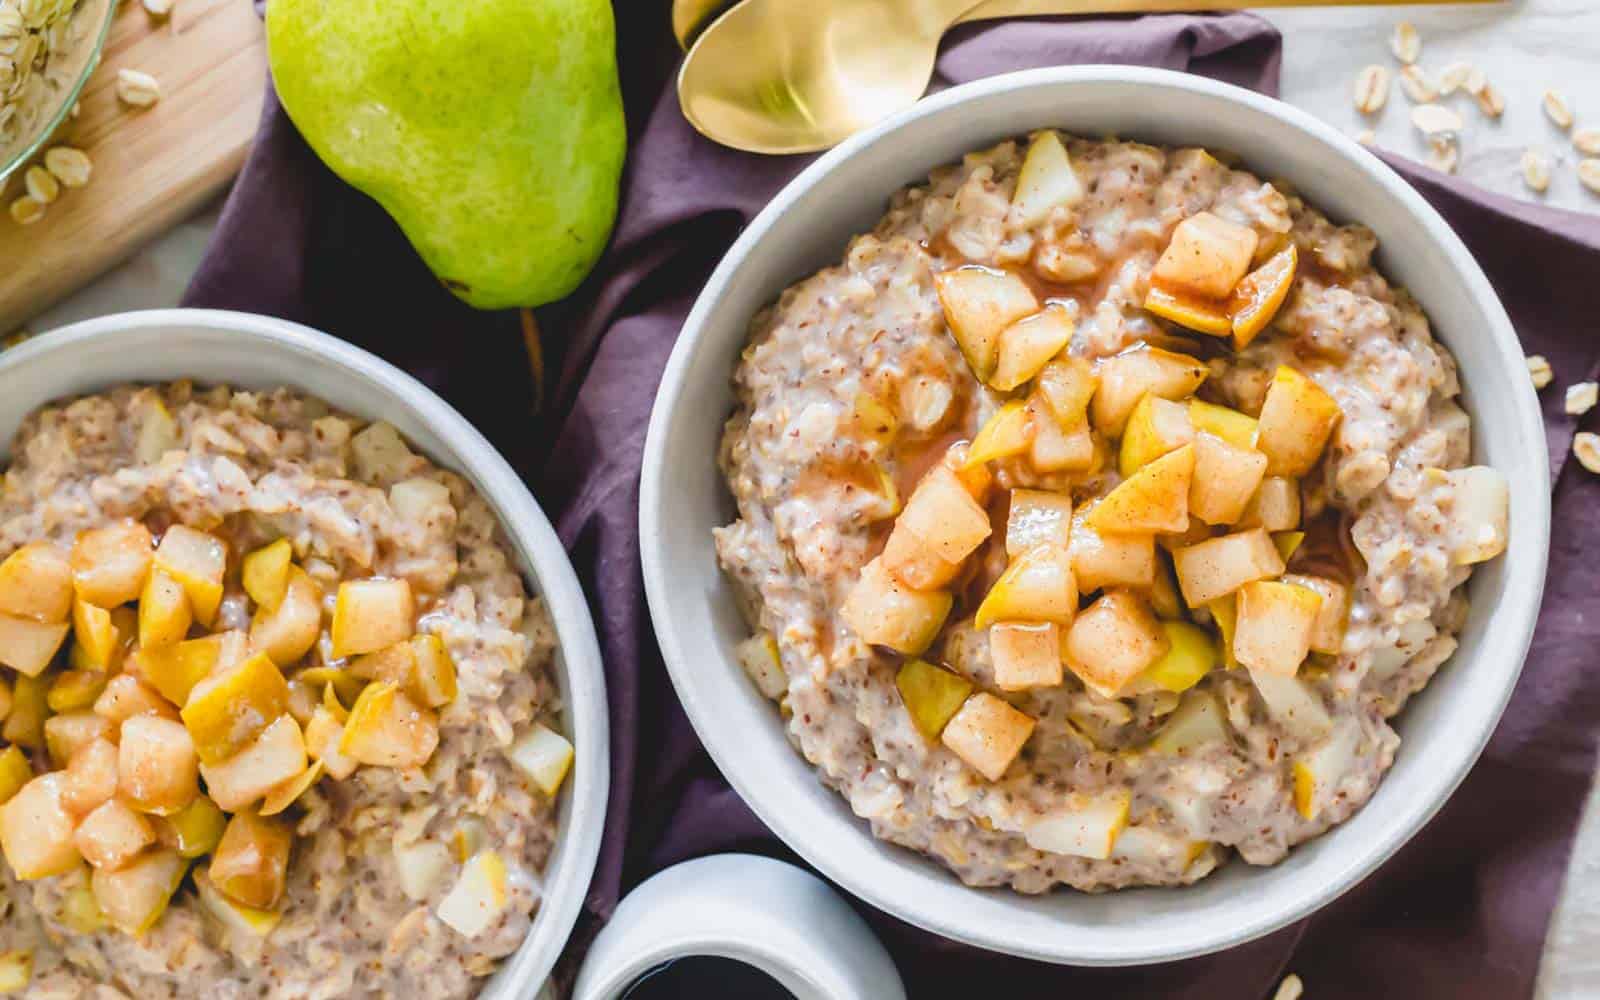 <p>This oatmeal is flavored with warming spices like cinnamon, cardamom, and nutmeg, topped with caramelized maple syrup pears, creating a comforting and aromatic winter breakfast.<br><strong>Get the Recipe: </strong><a href="https://www.runningtothekitchen.com/spiced-pear-oatmeal/?utm_source=msn&utm_medium=page&utm_campaign=msn">Spiced Pear Oatmeal</a></p>